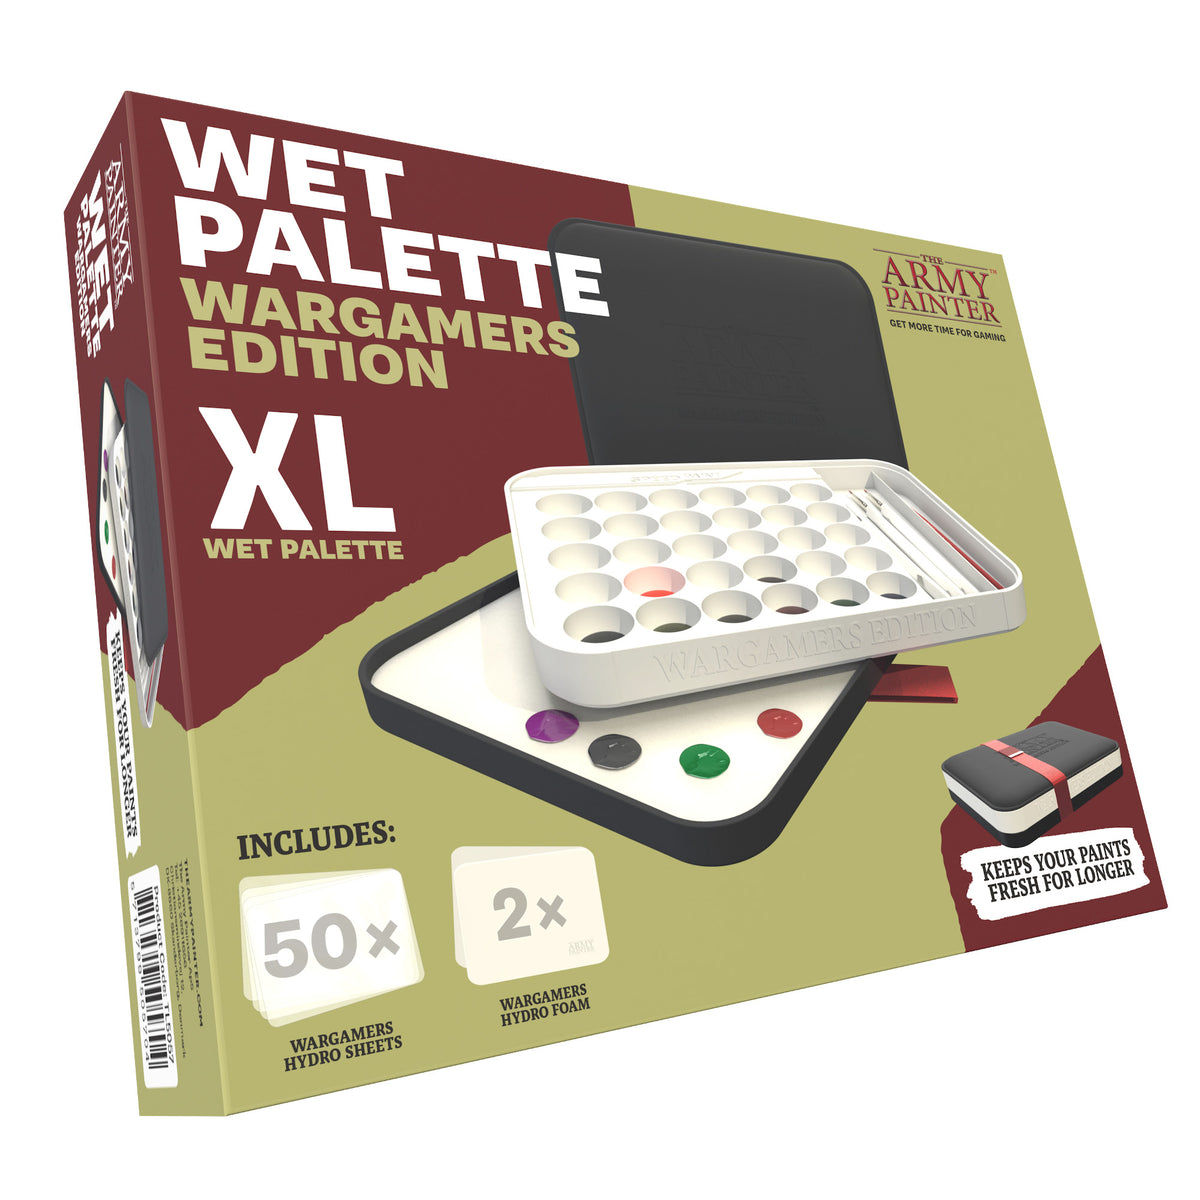 The Army Painter: Wet Palette - Fair Game